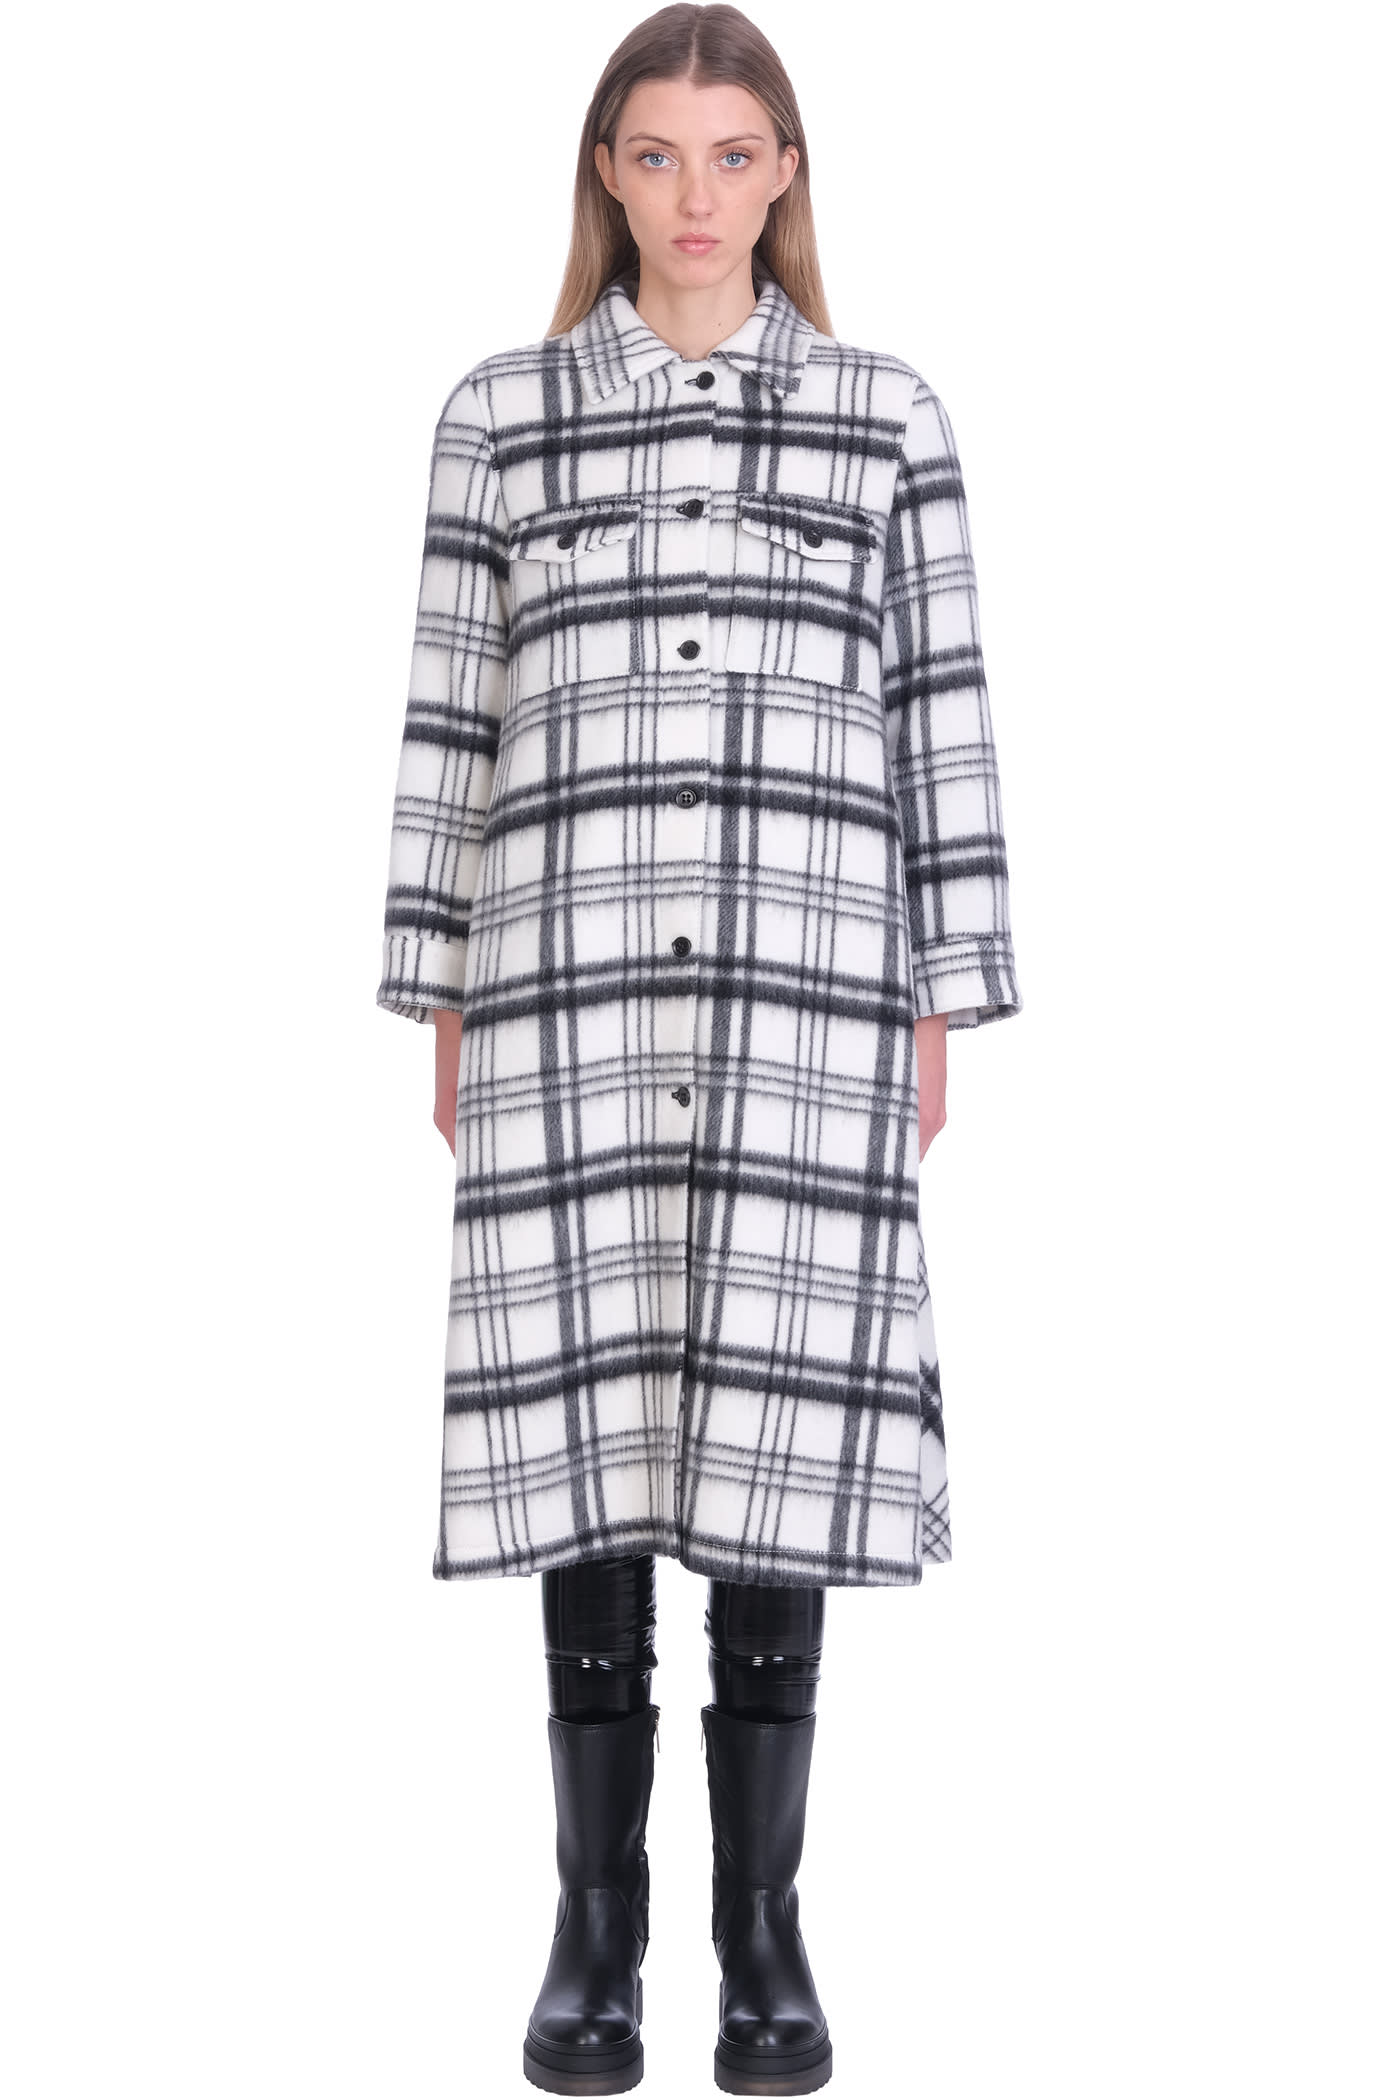 RED Valentino Coat In White Wool